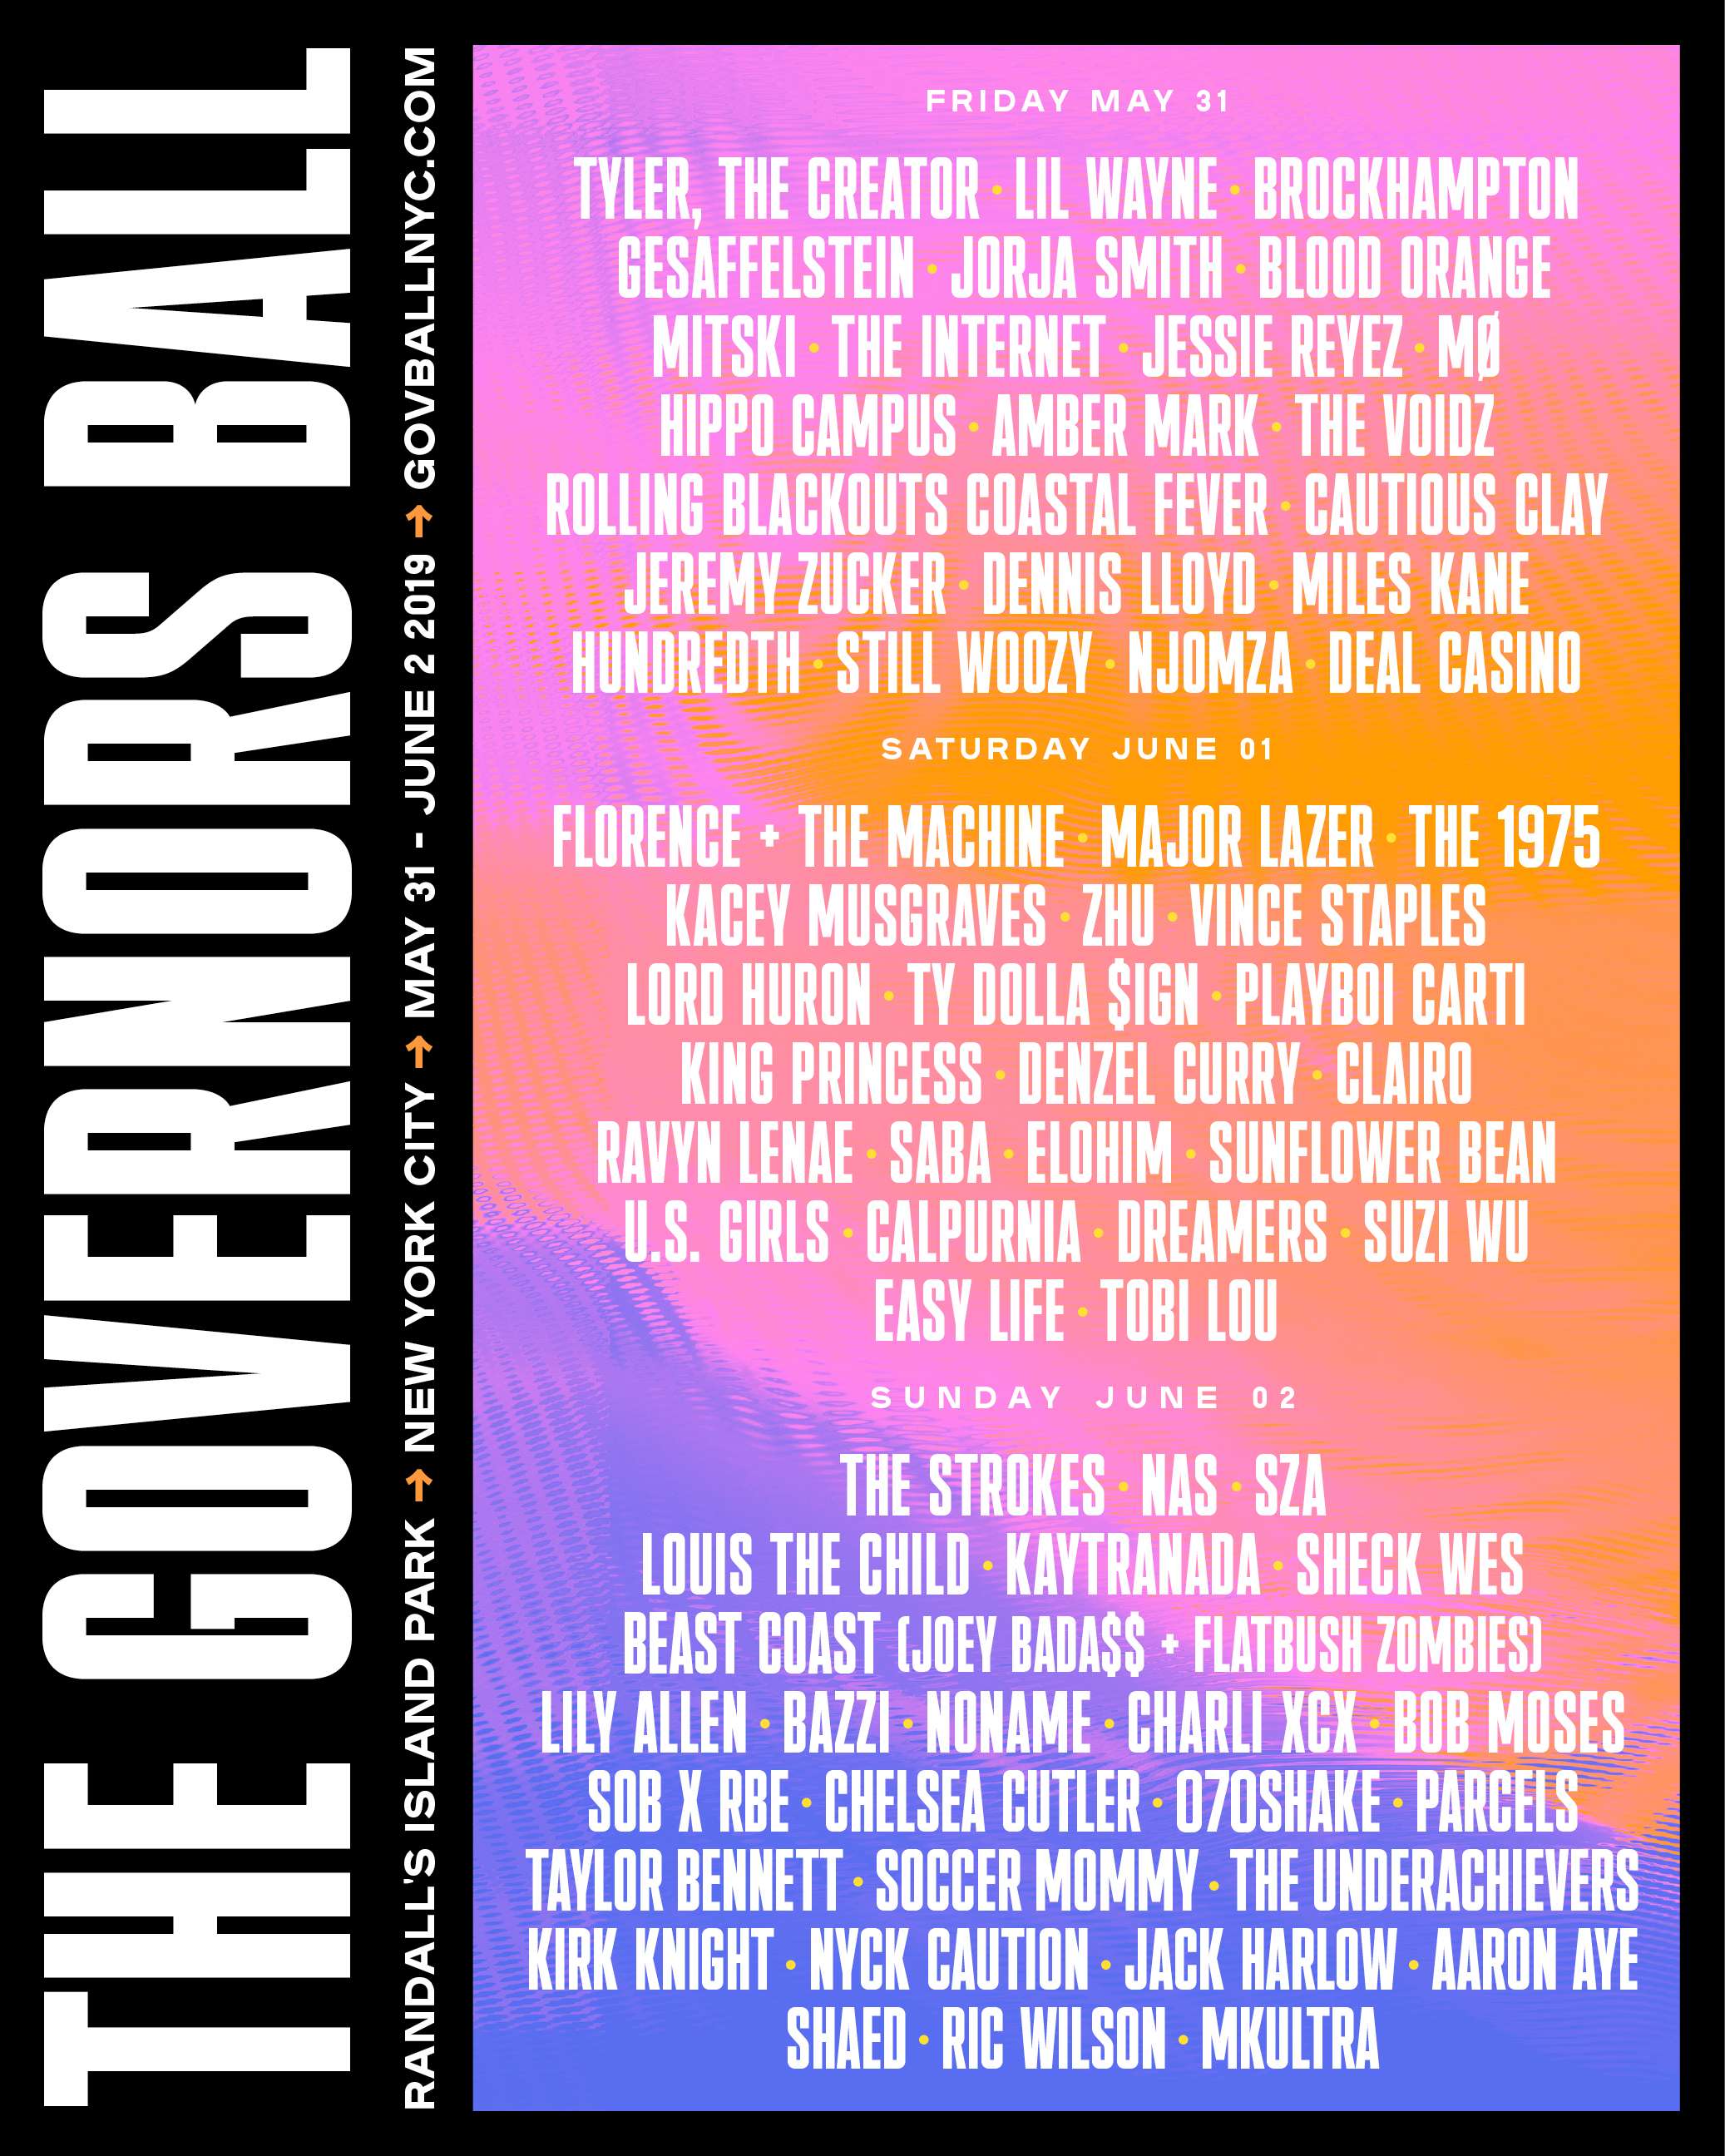 IT’S LINEUP SZN: Governors Ball Takes Totally Different Direction Than Coachella